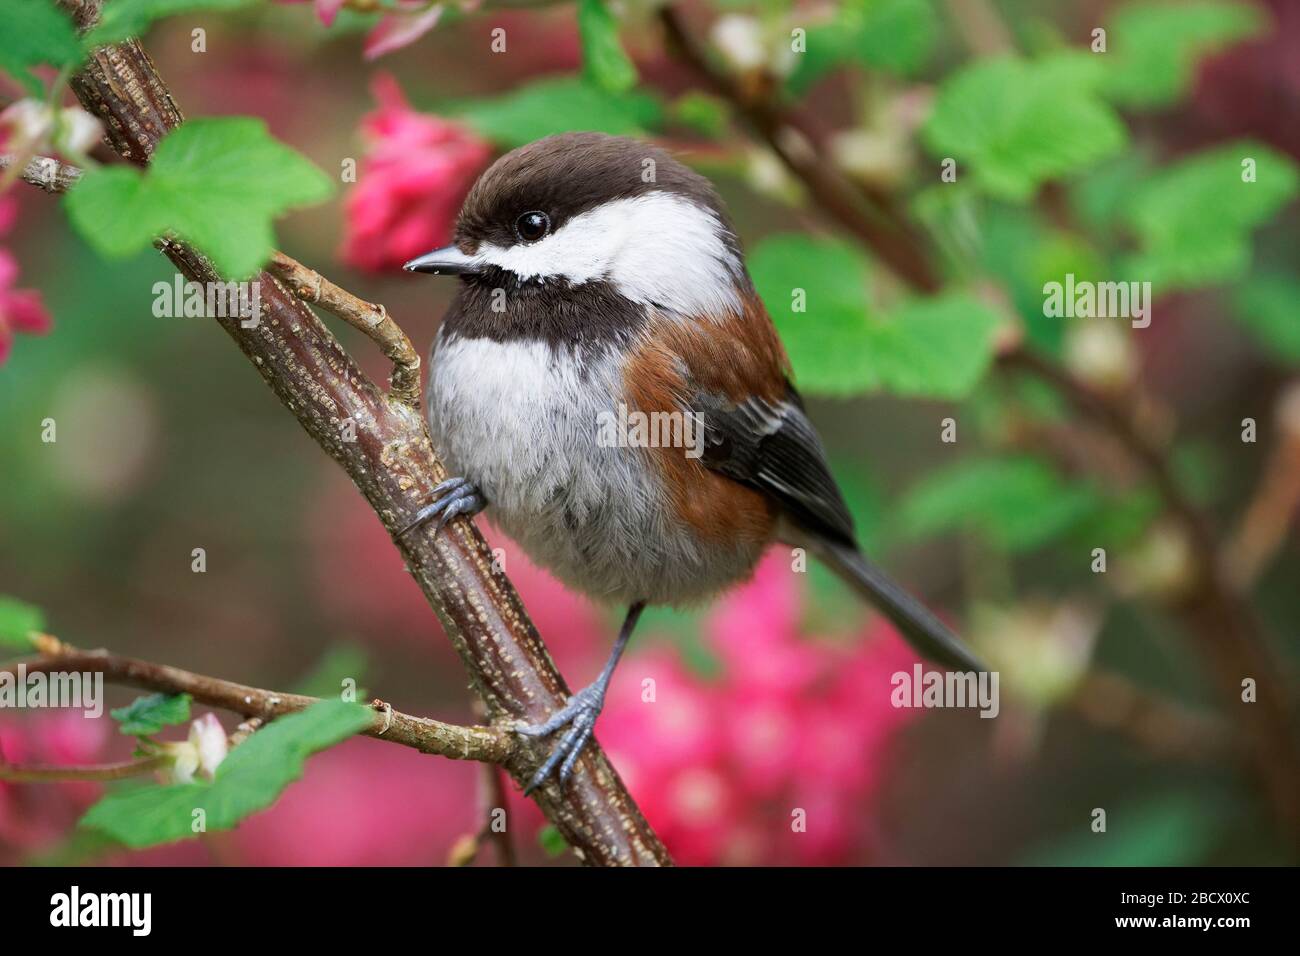 Chestnut-backed chickadee perched on red flowering currant branch, Snohomish, Washington, USA Stock Photo